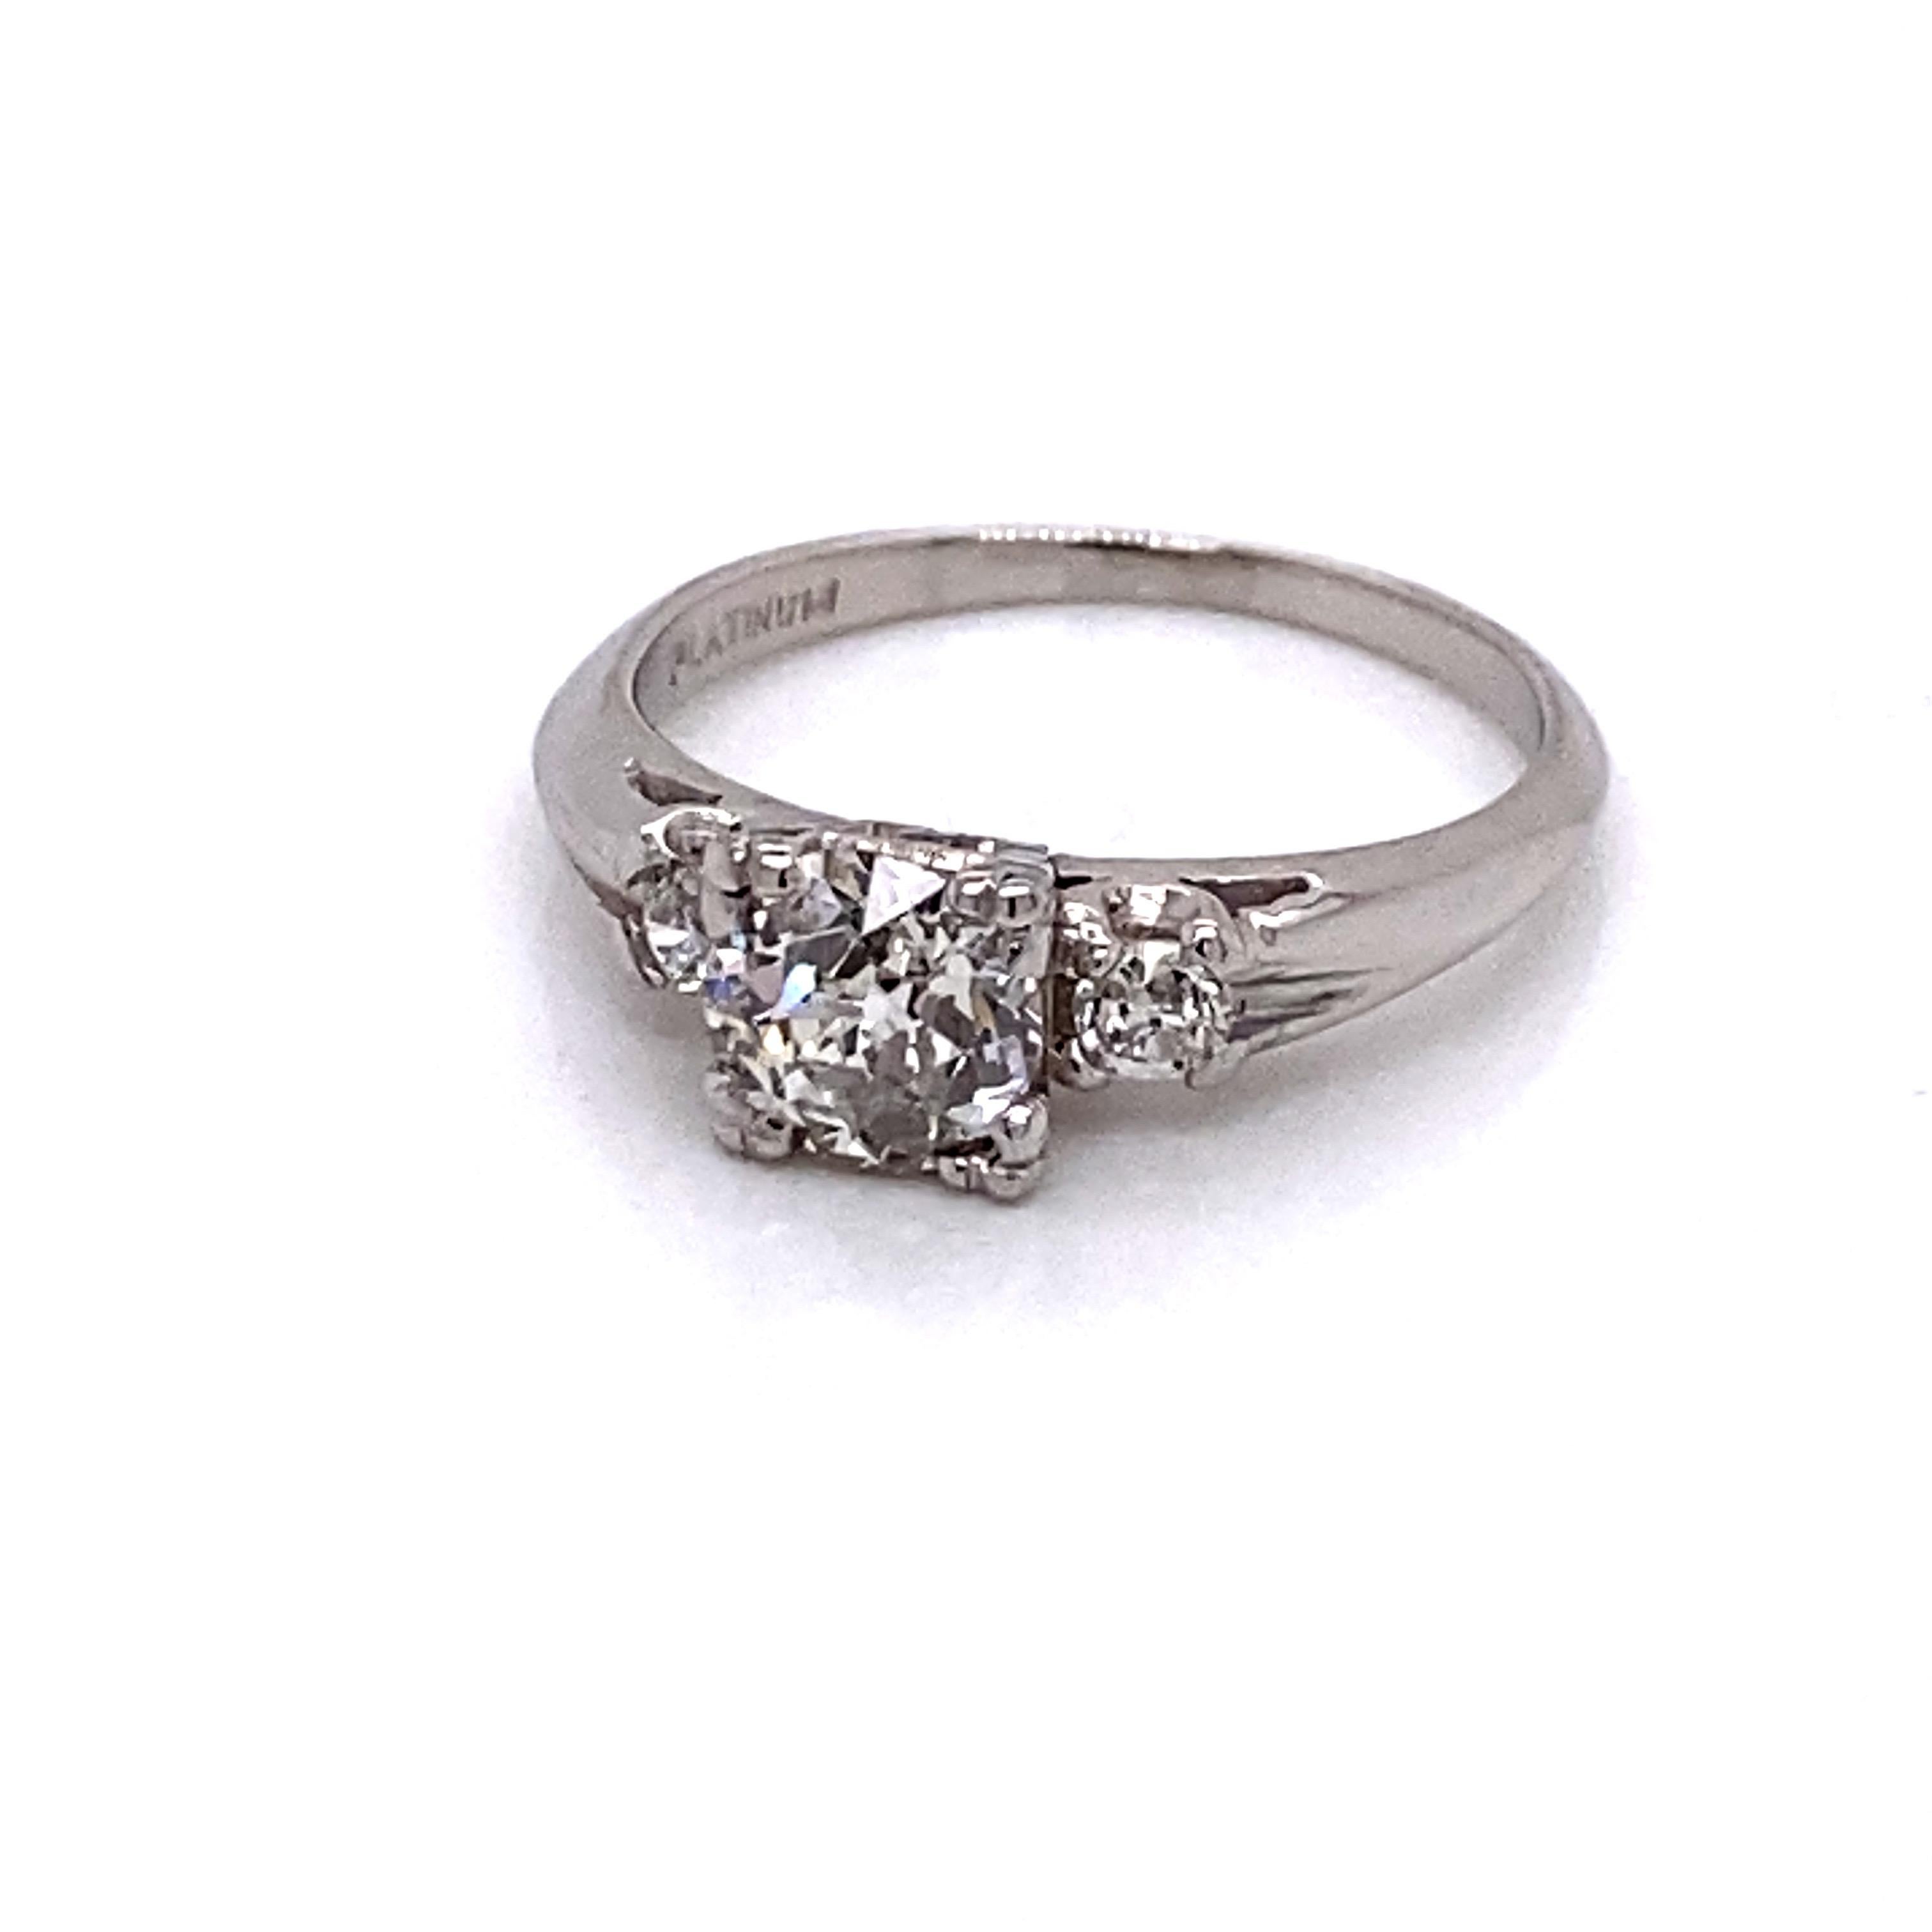 Vintage Platinum Art Deco 3 Stone Diamond Ring - Center European cut diamond weighs .84ct and is I color and I1 clarity. The diamond is set in a fishtail design head. The 2 side diamonds are also European cut diamonds and they weigh .15ct with H